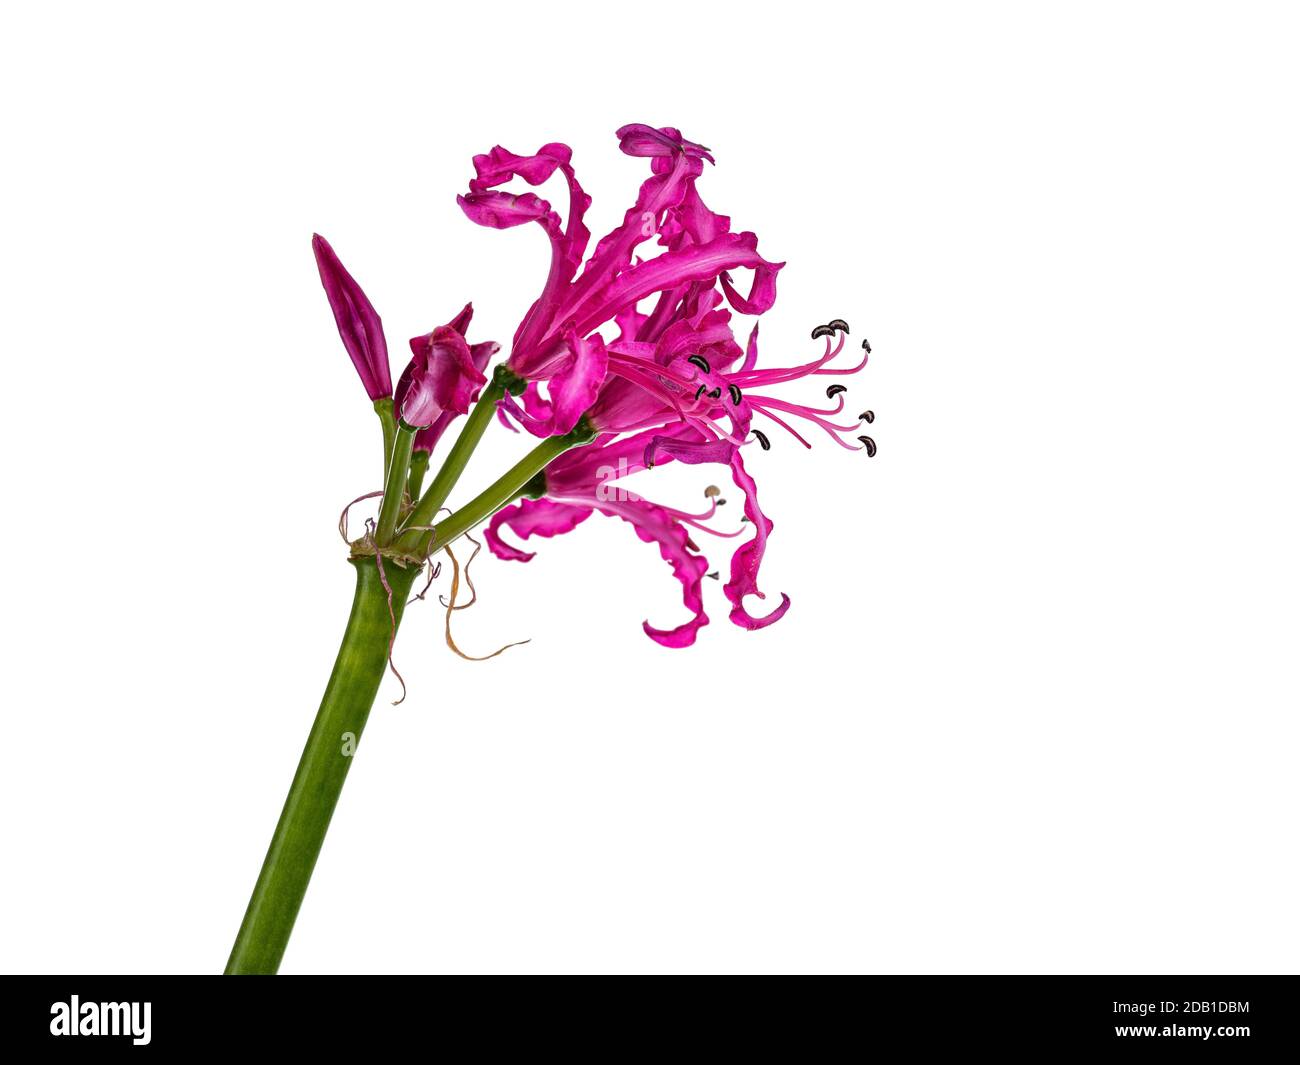 Close up sIde view of single fuchsia pink Nerine flower, isolated on white background. Stock Photo